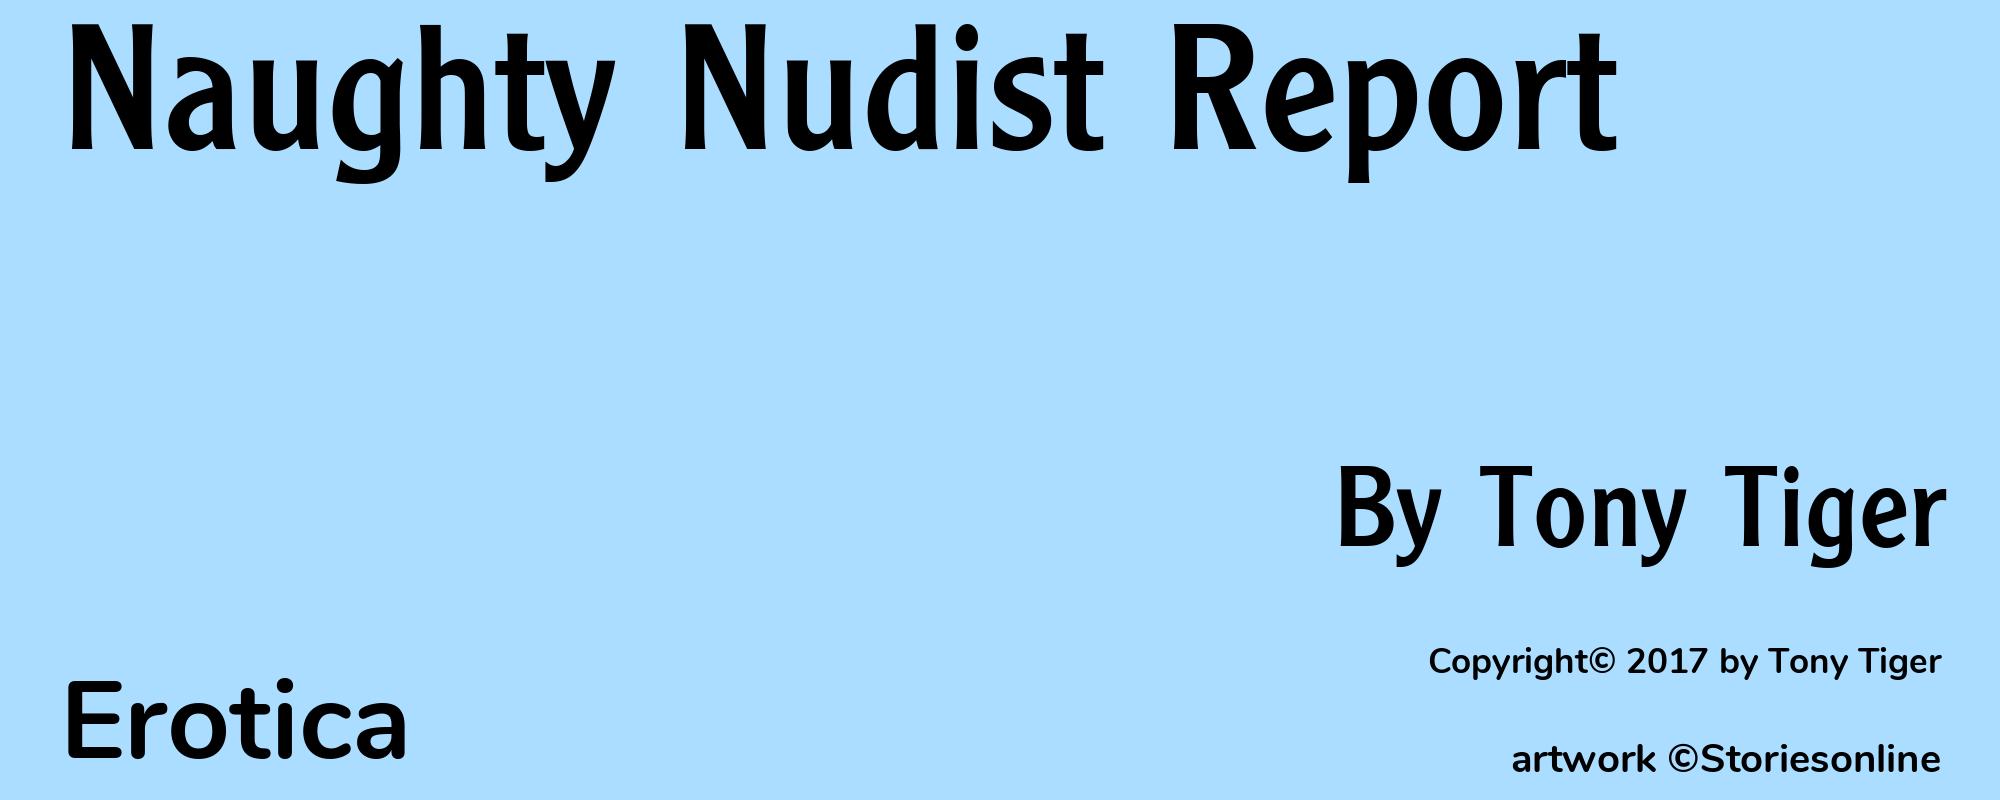 Naughty Nudist Report - Cover